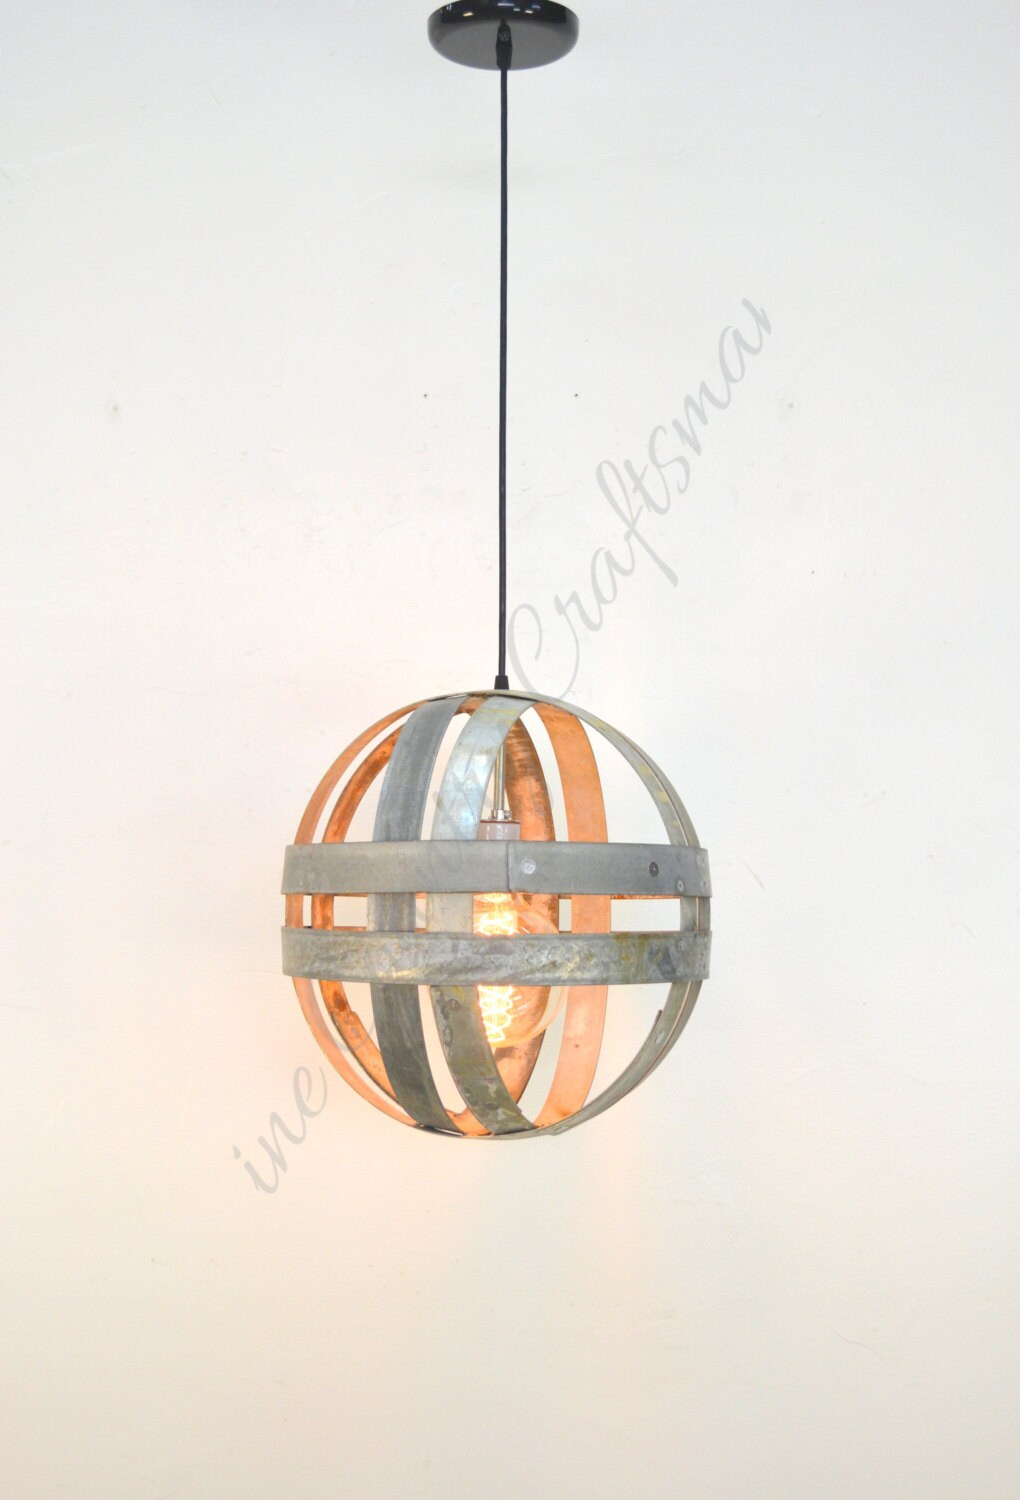 Wine Barrel Chandelier - Maruta - Double Ring Pendant Light made from retired California wine barrels. 100% Recycled!